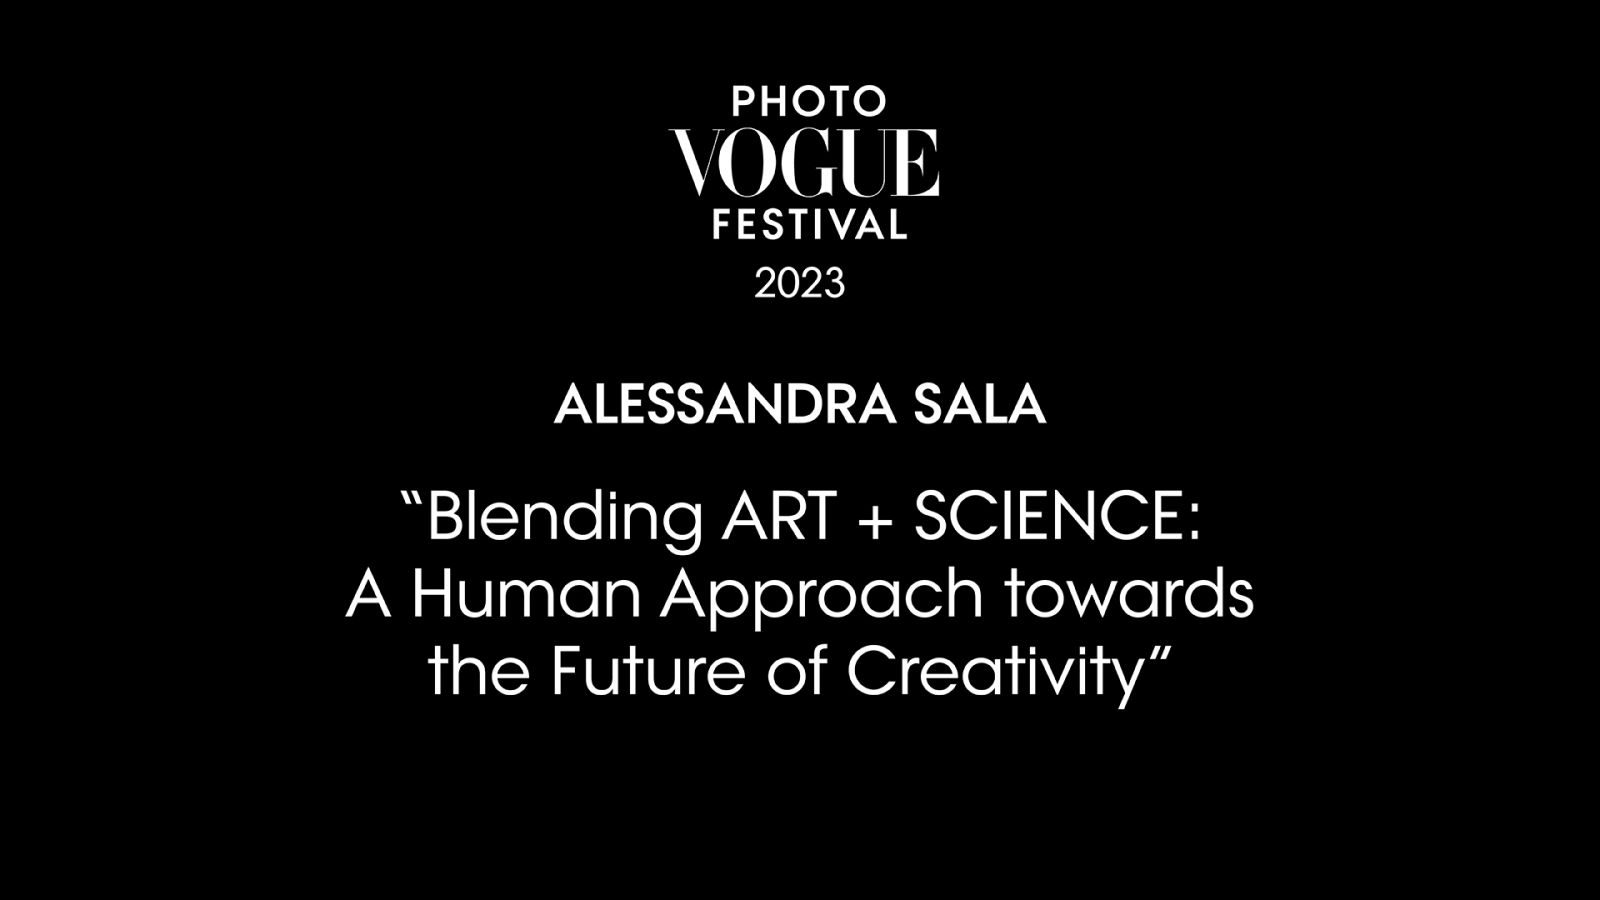 Blending ART + SCIENCE: A Human Approach towards the Future of Creativity | PhotoVogue Festival 2023: What Makes Us Human? Image in the Age of A.I.